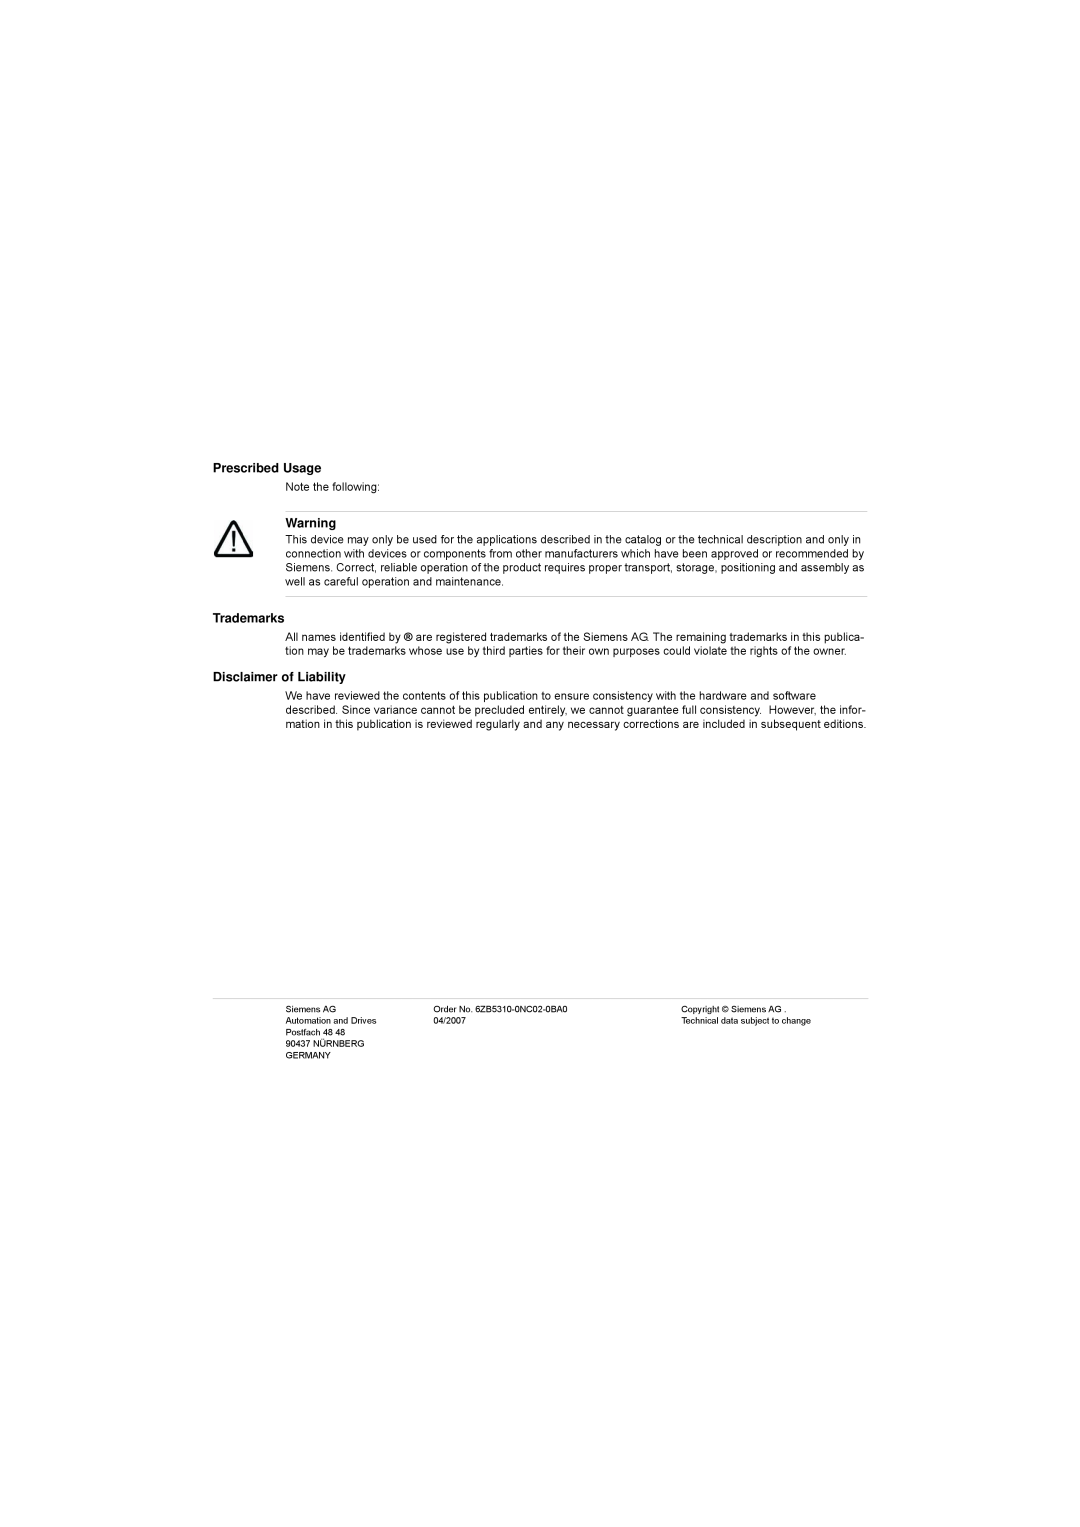 Siemens S7-300 manual Prescribed Usage, Trademarks, Disclaimer of Liability 